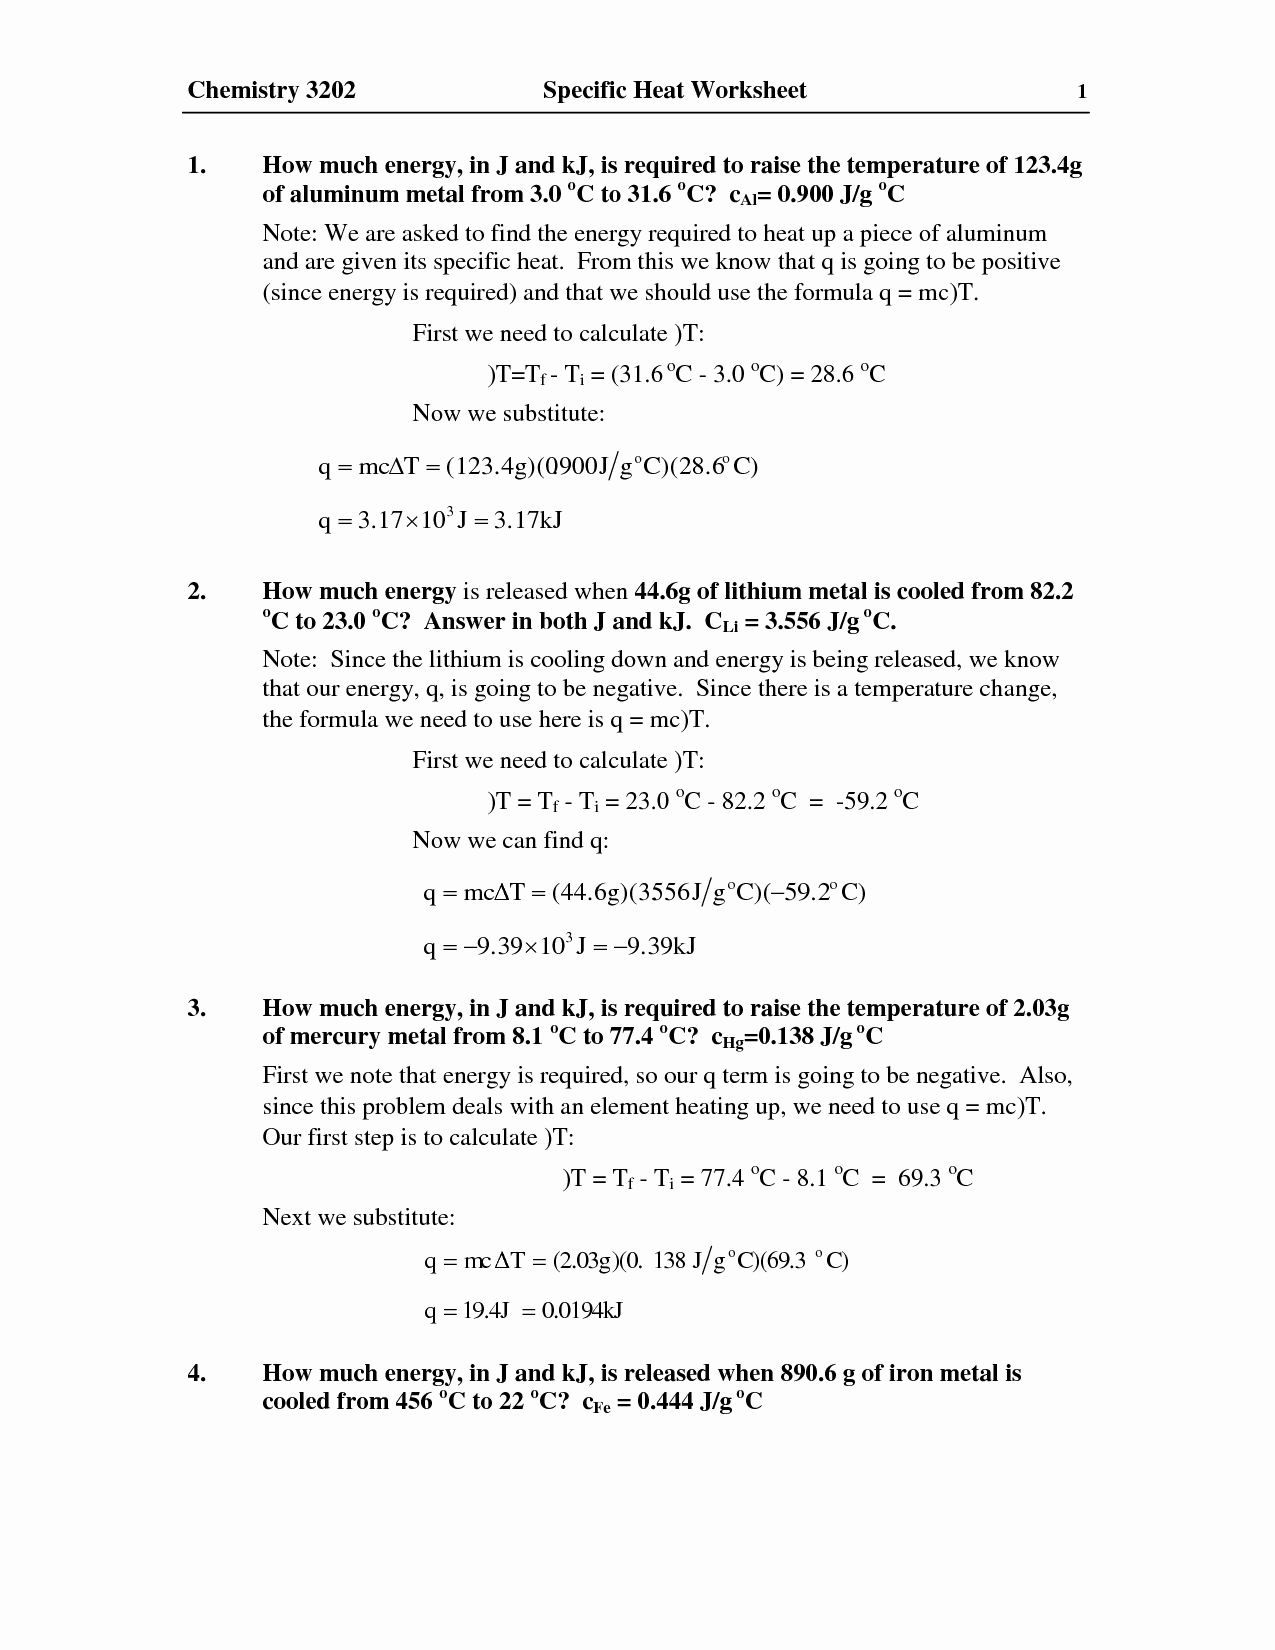 Specific Heat Worksheet Answers Inspirational Heat Answers Driverlayer Search Engine